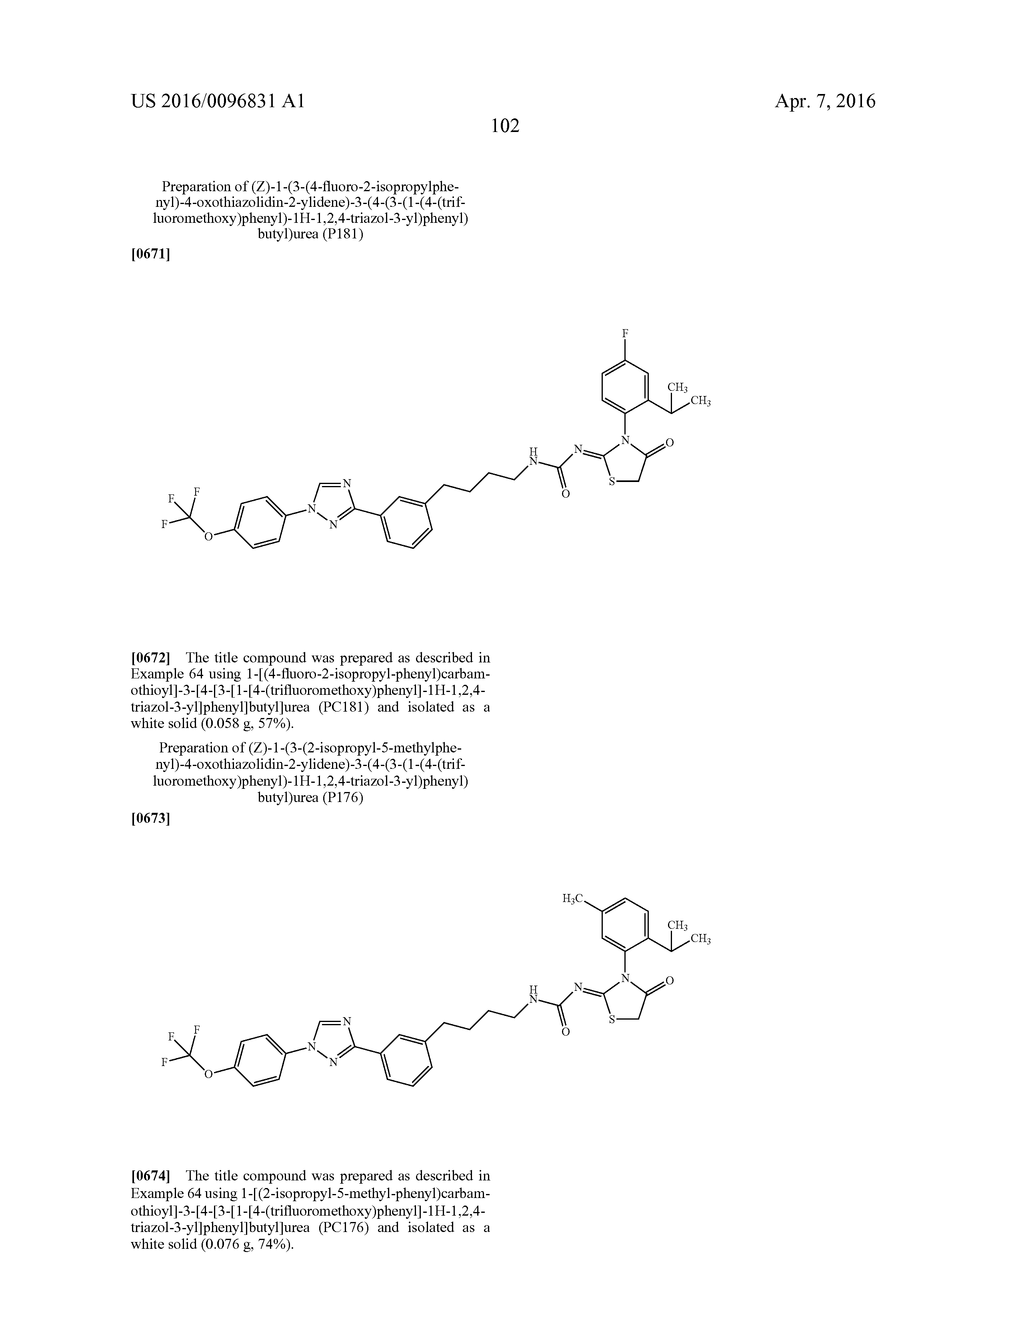 MOLECULES HAVING CERTAIN PESTICIDAL UTILITIES, AND INTERMEDIATES,     COMPOSITIONS, AND PROCESSES RELATED THERETO - diagram, schematic, and image 103